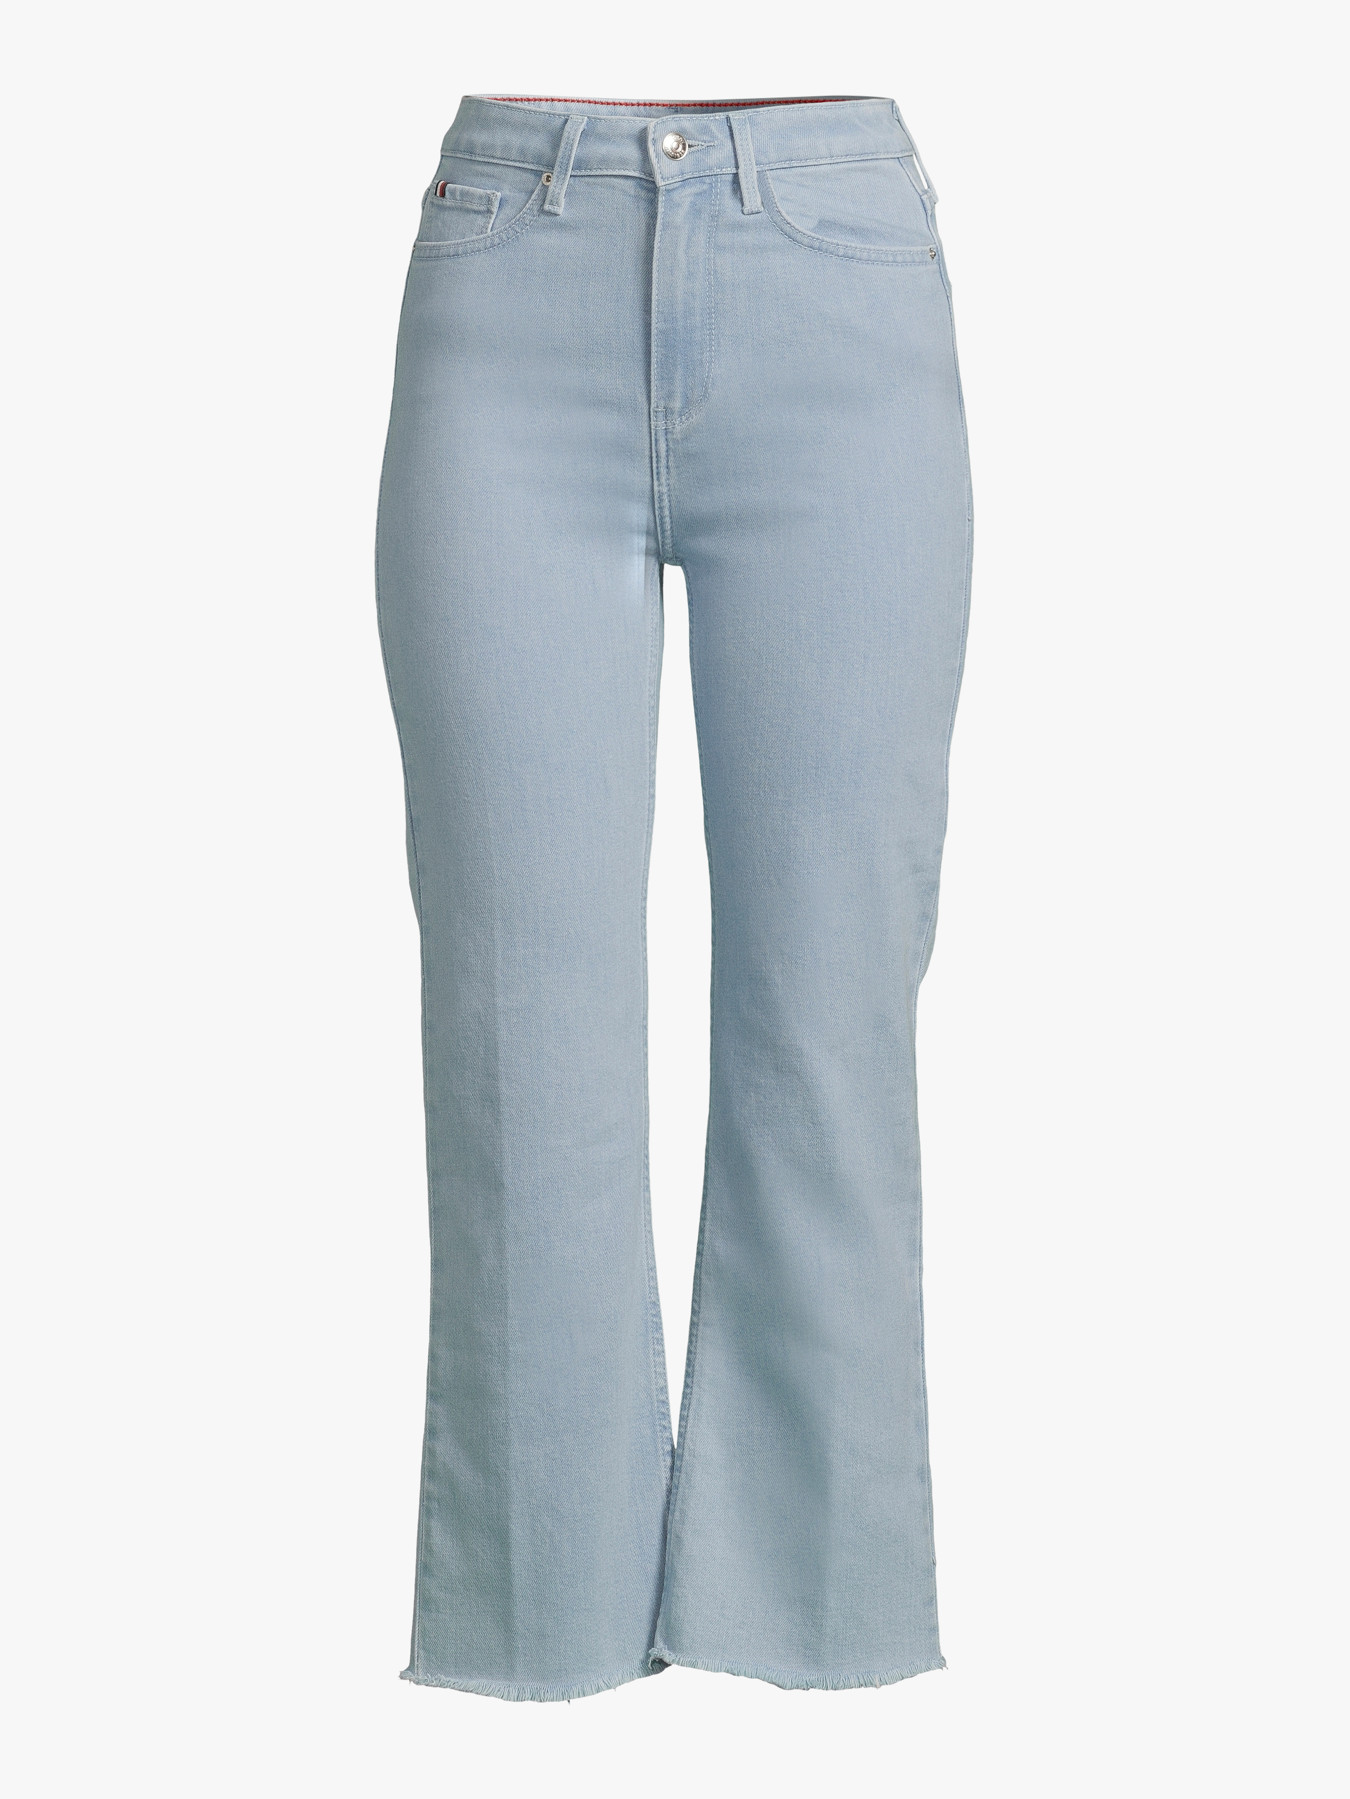 Tommy Hilfiger High Rise Kick Flare Jeans | Cropped | Fenwick